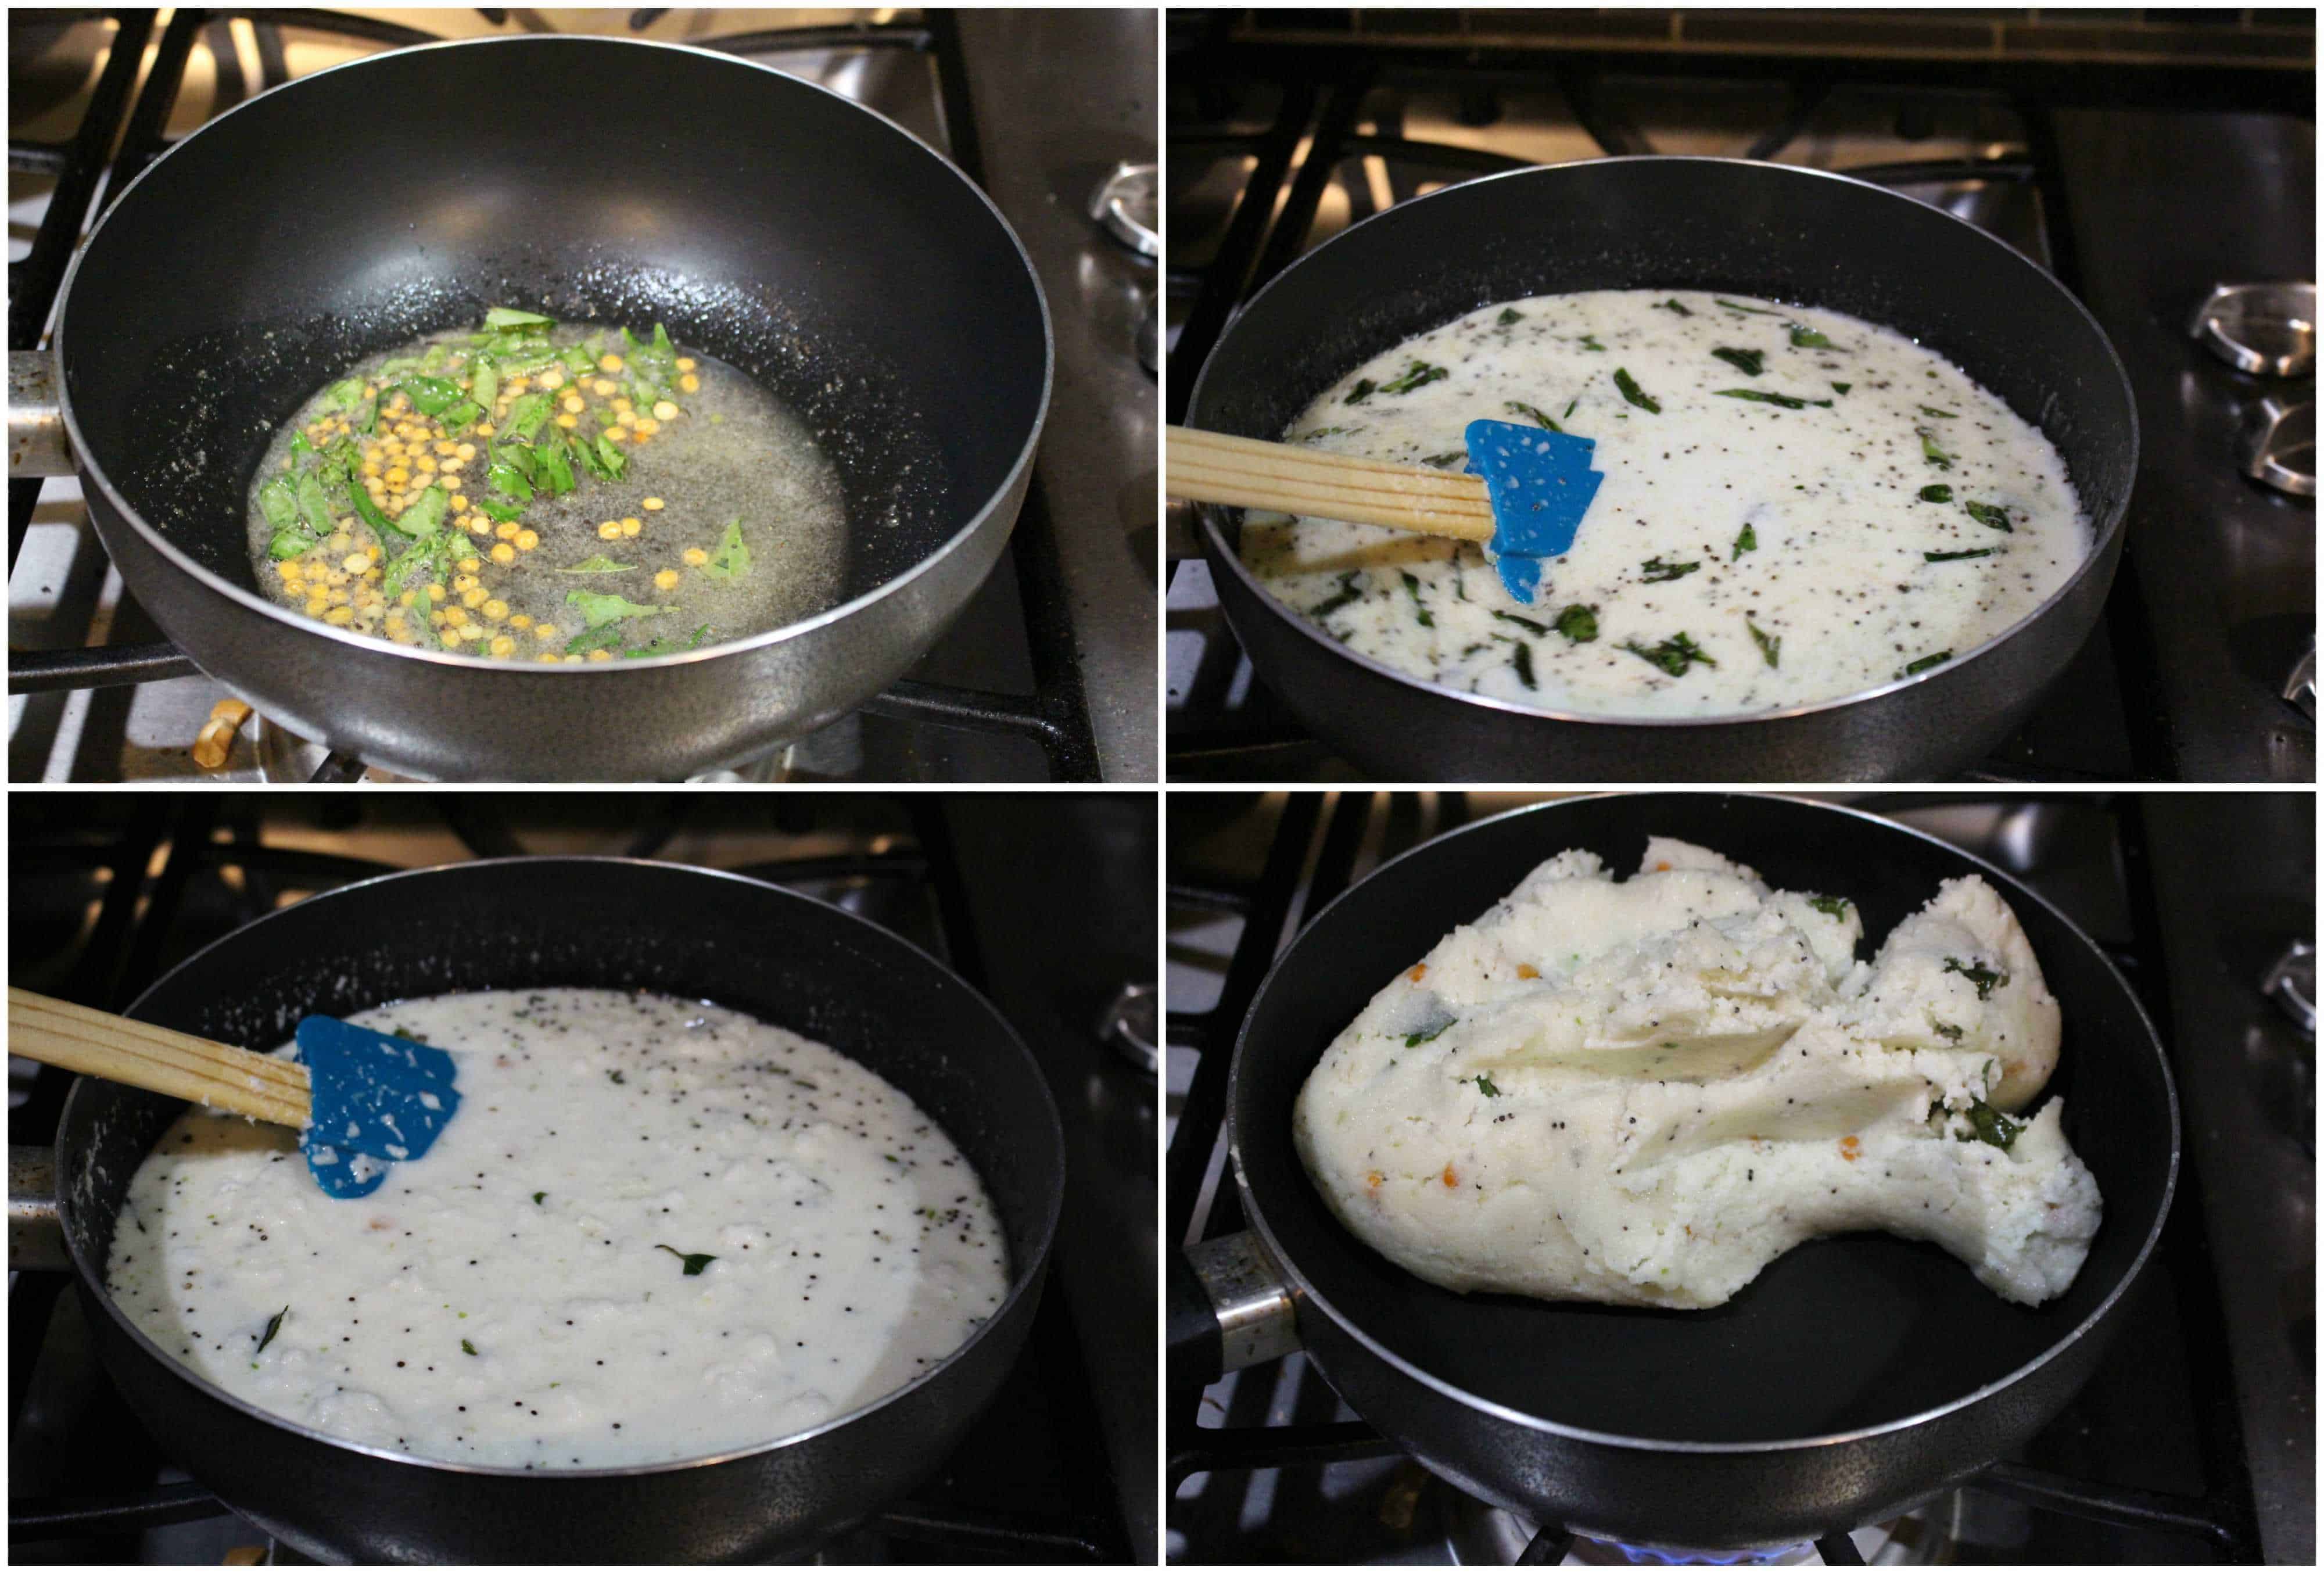 Cooking the ingredients in a Pan